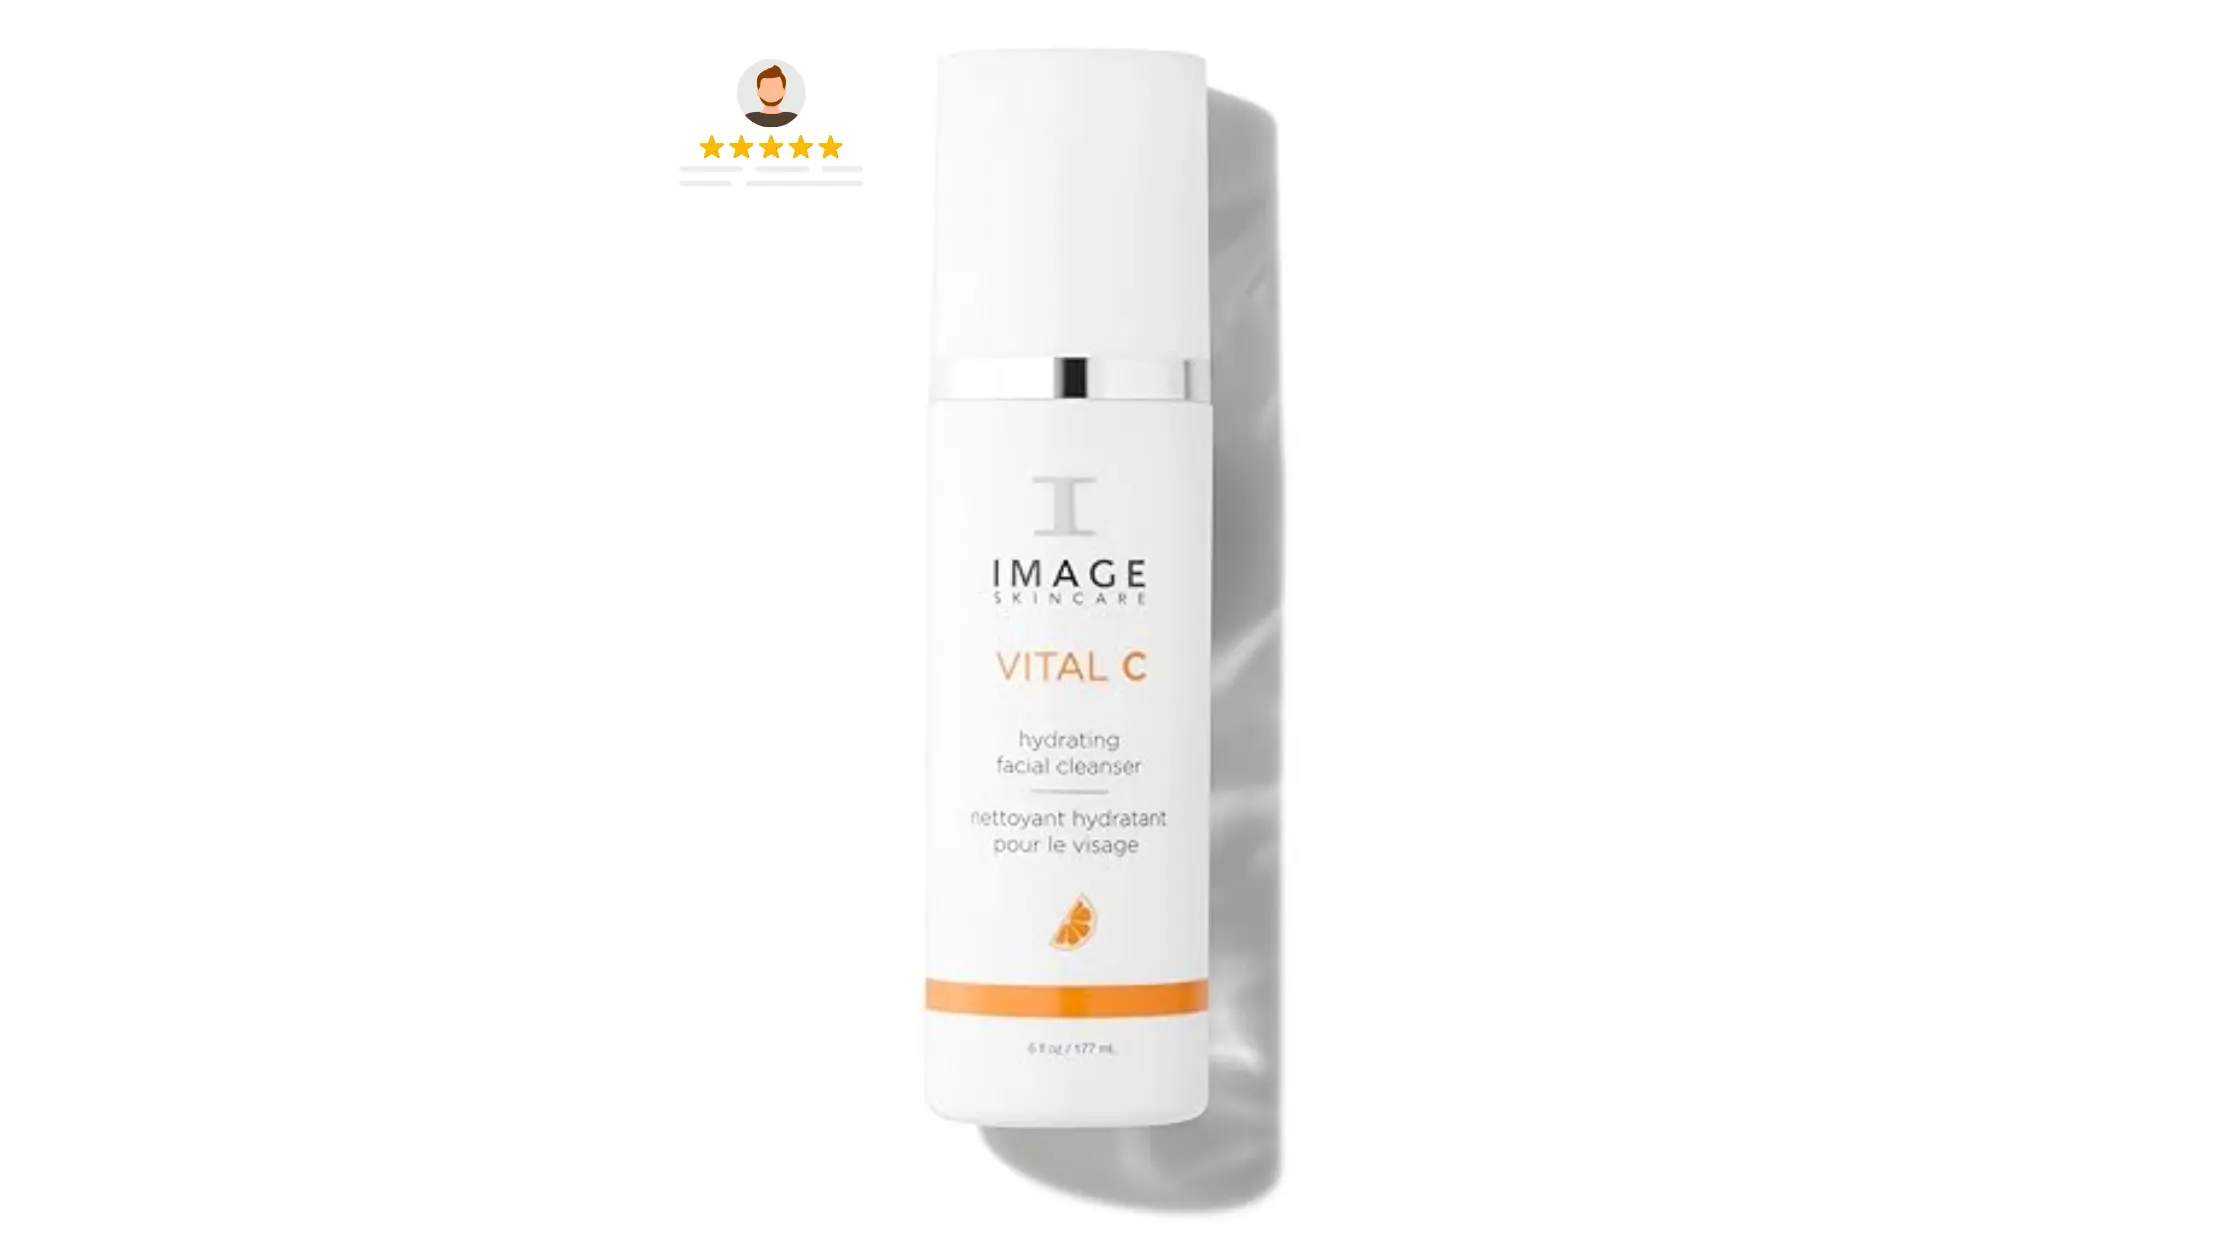 IMAGE Skincare Vital C Hydrating Facial Cleanser Review